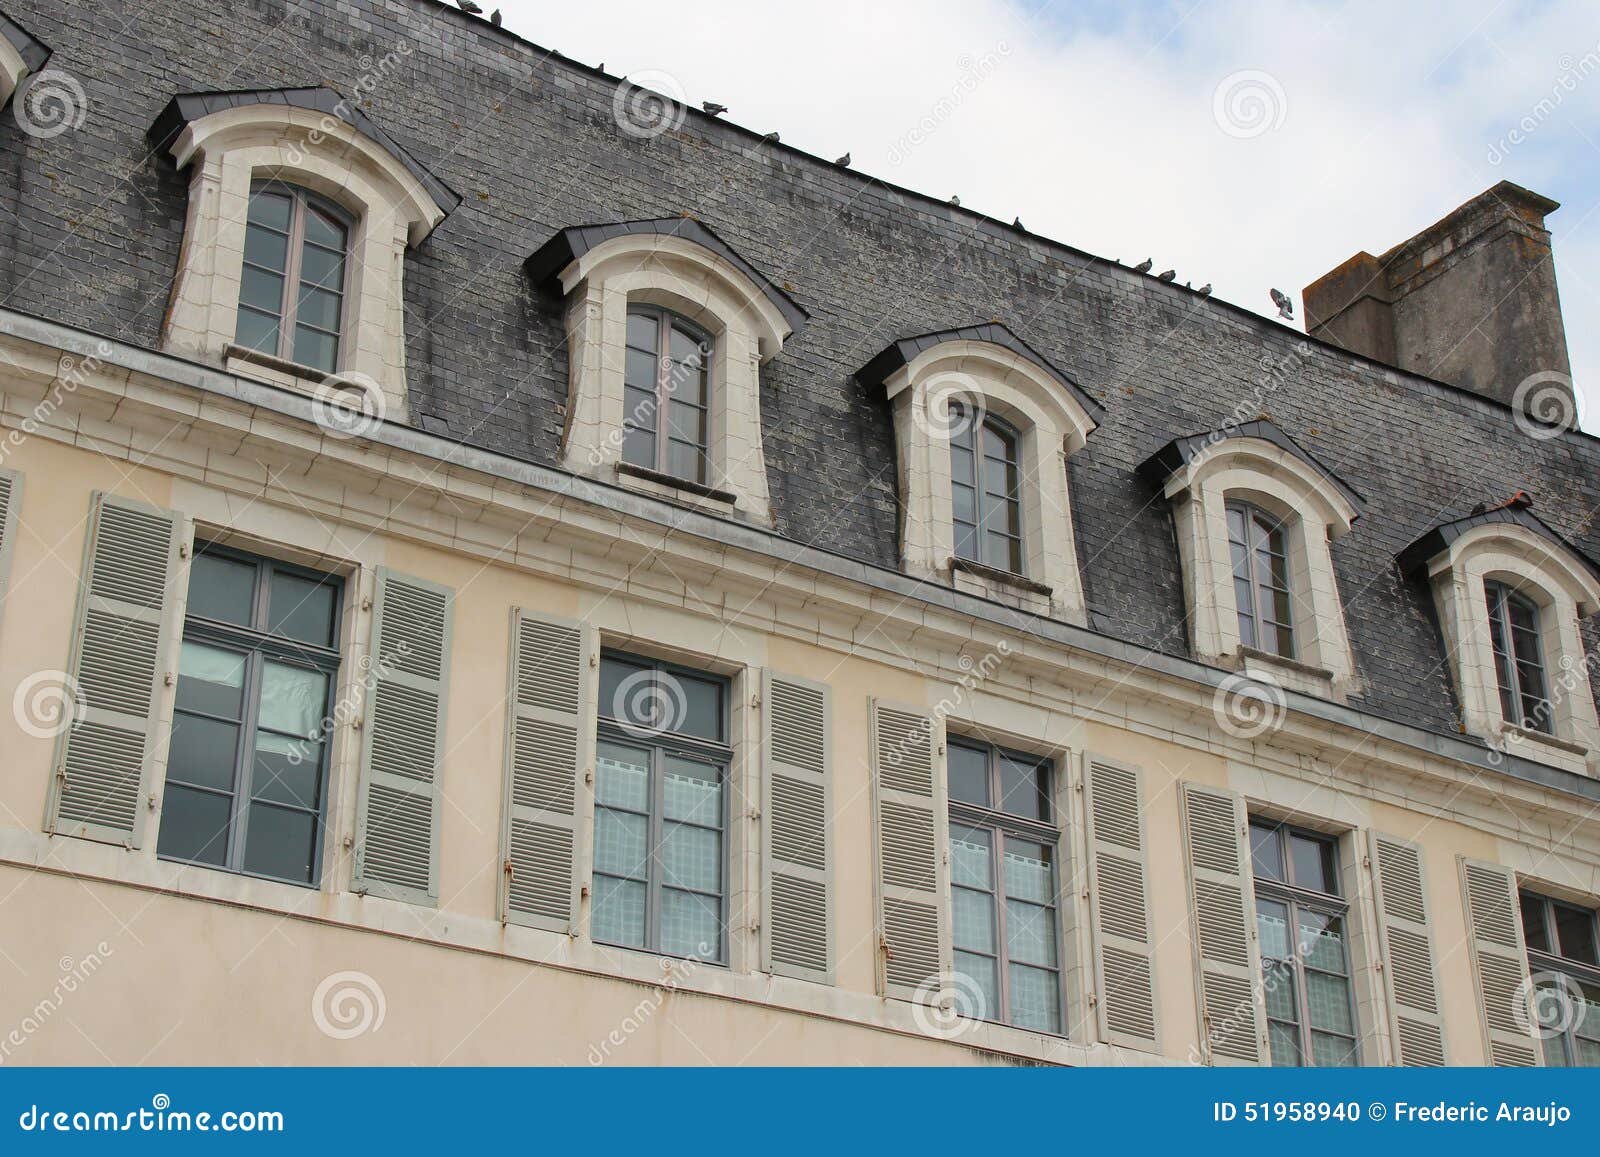 pigeons are standing on the ridgepole of a building in quimperle (france)